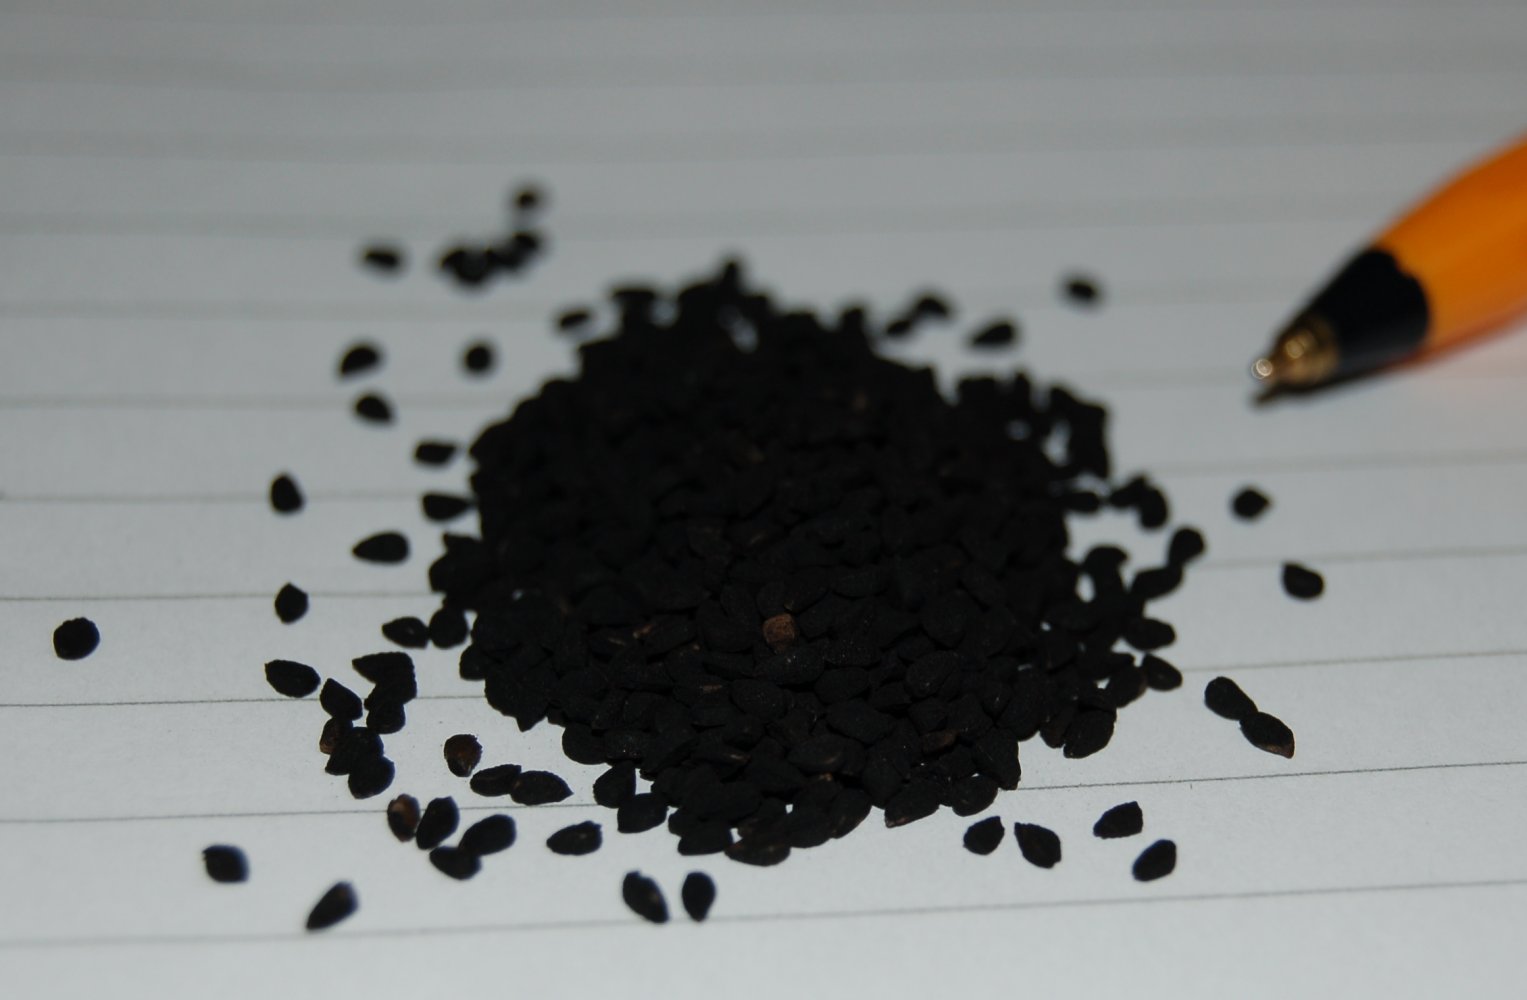 Curious Black Seed Oil Cures ‘Everything But Death’